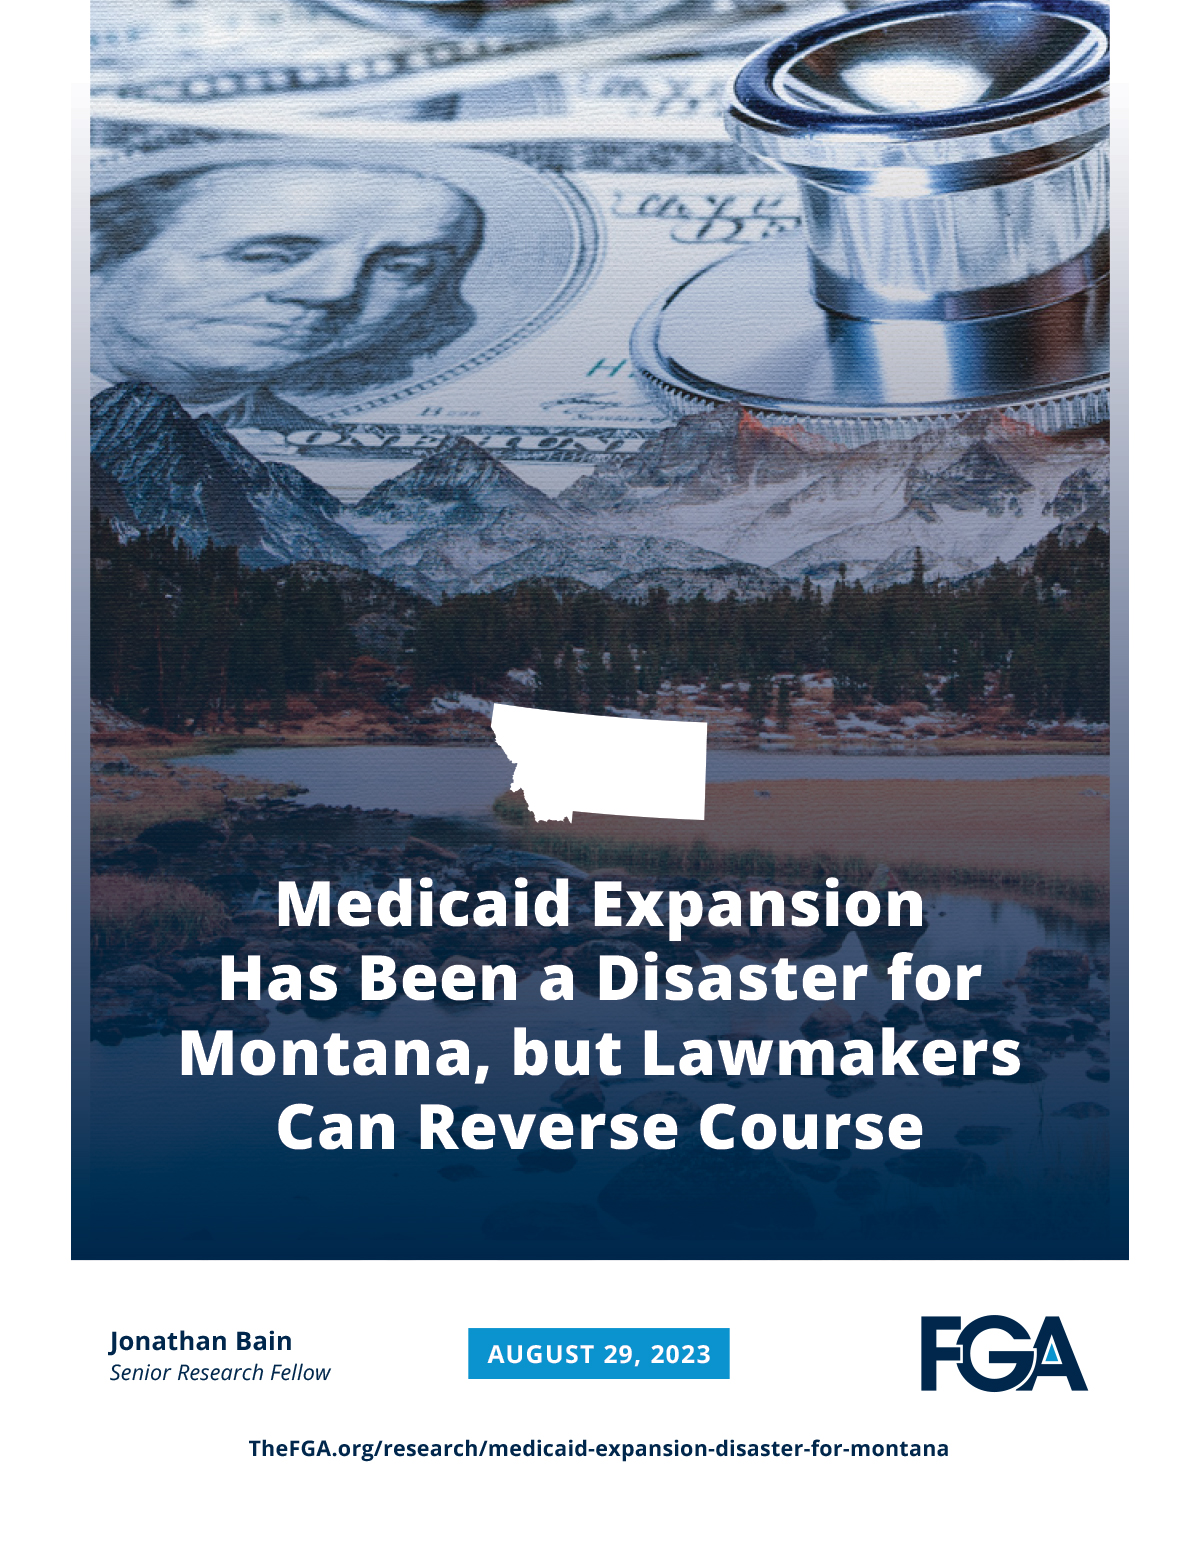 Medicaid Expansion Has Been a Disaster for Montana, But Lawmakers Can Reverse Course